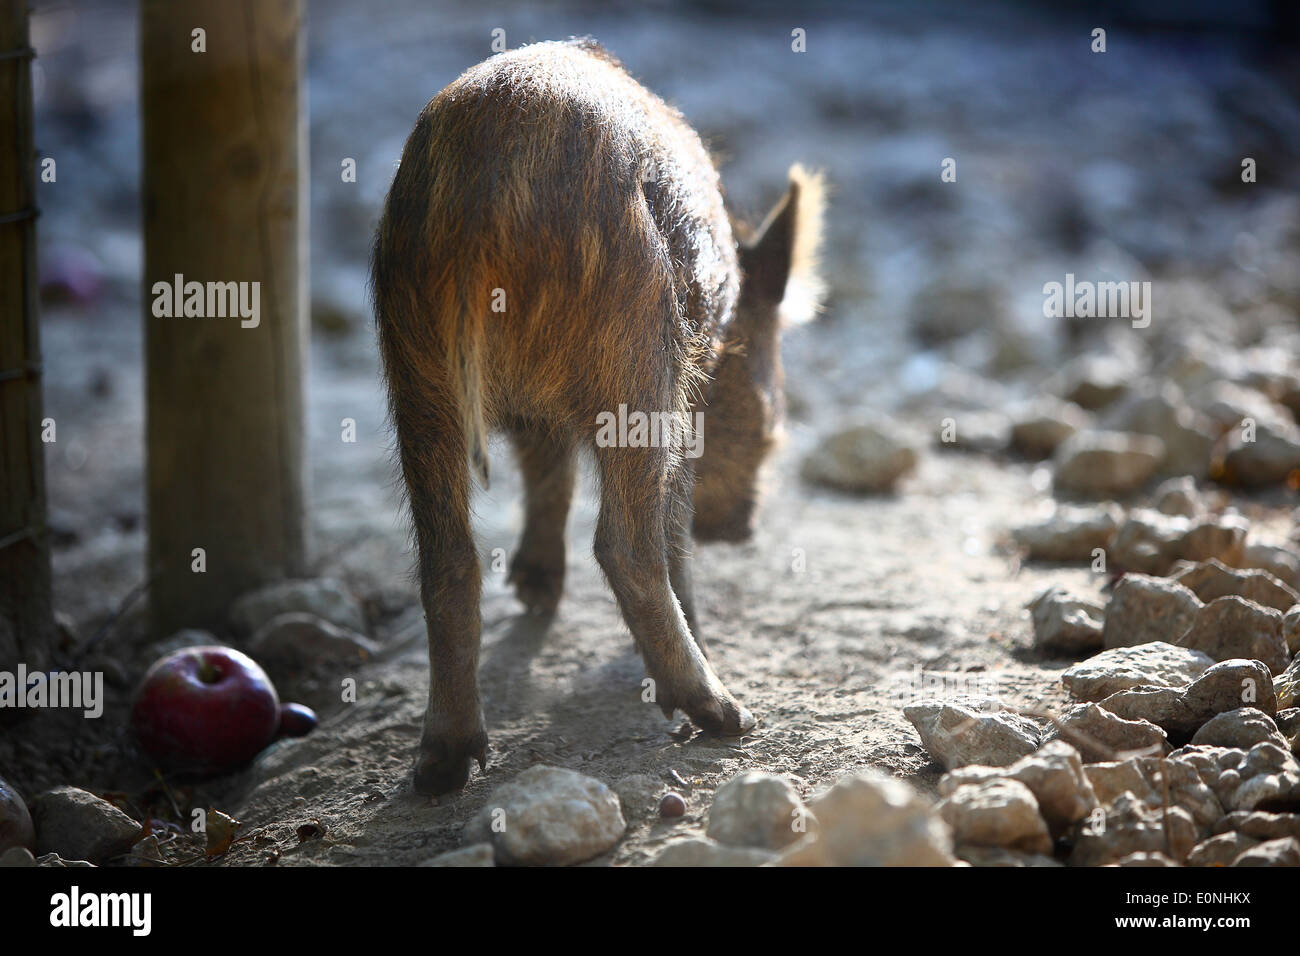 Young wild boar in a deer park Stock Photo